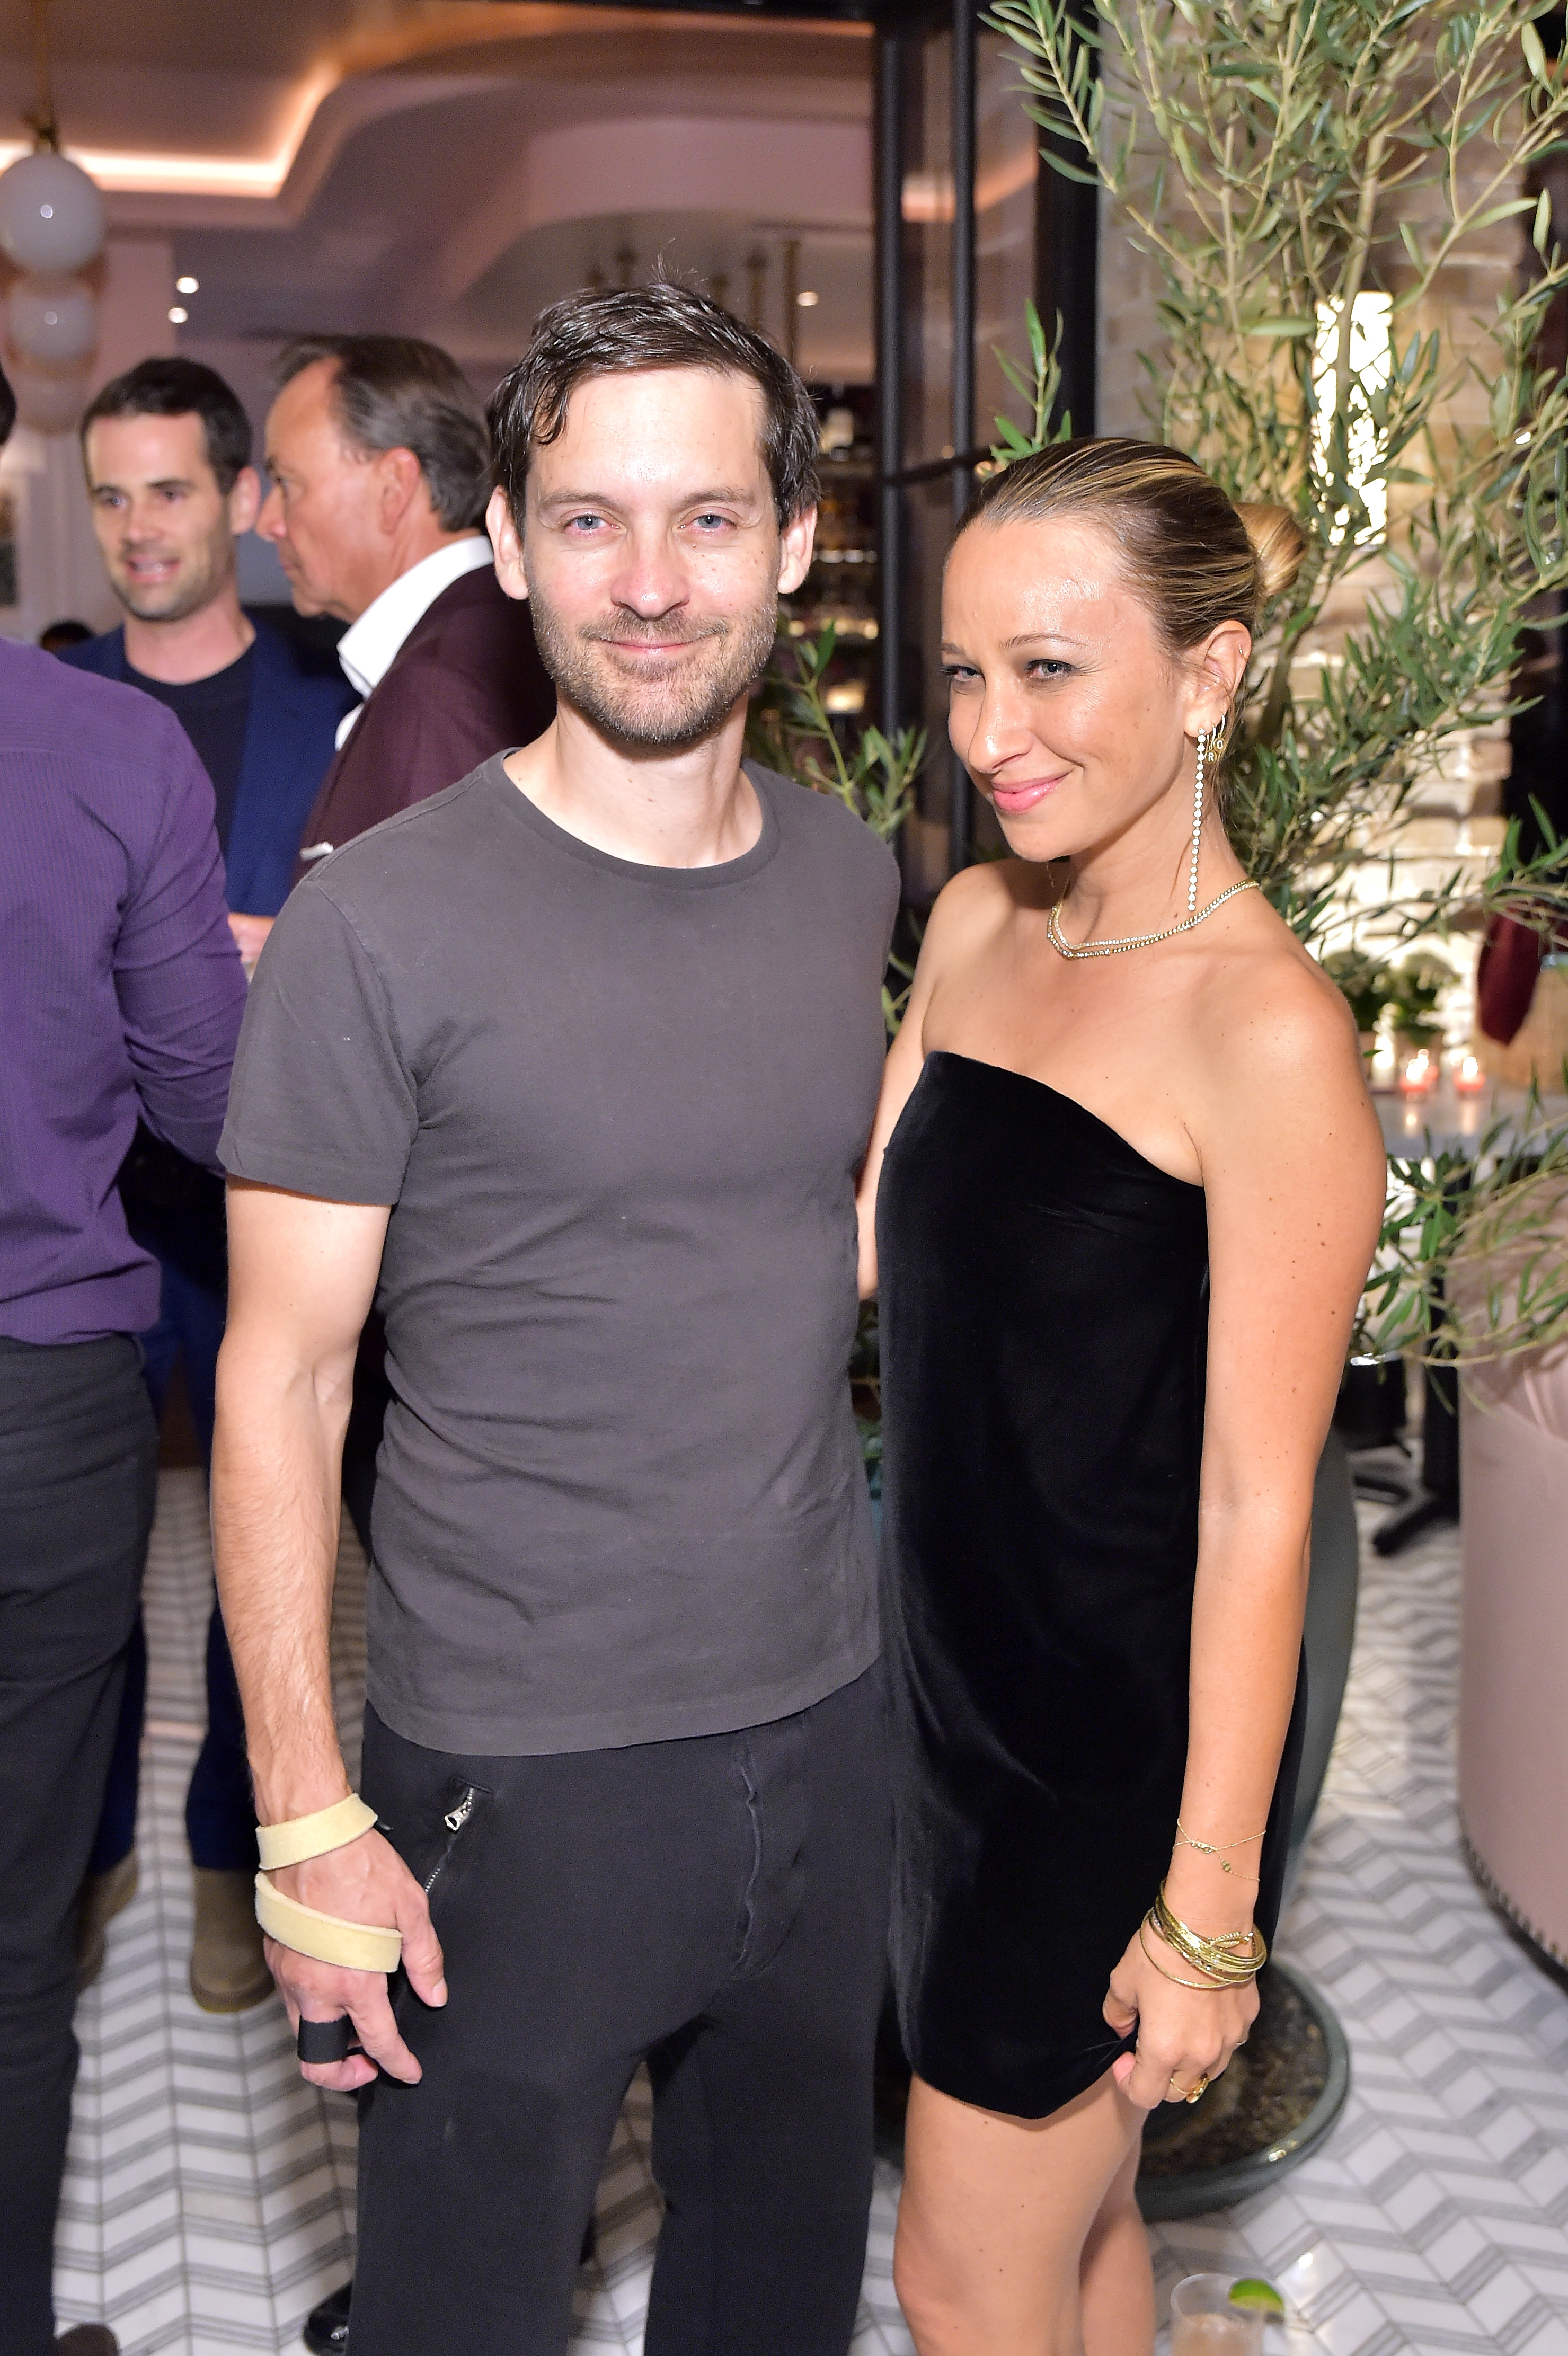 Tobey Maguire and Jennifer Meyer, seen together at Palisades Village At The Draycott in Pacific Palisades, California on October 17, 2018, were married for four years before divorcing